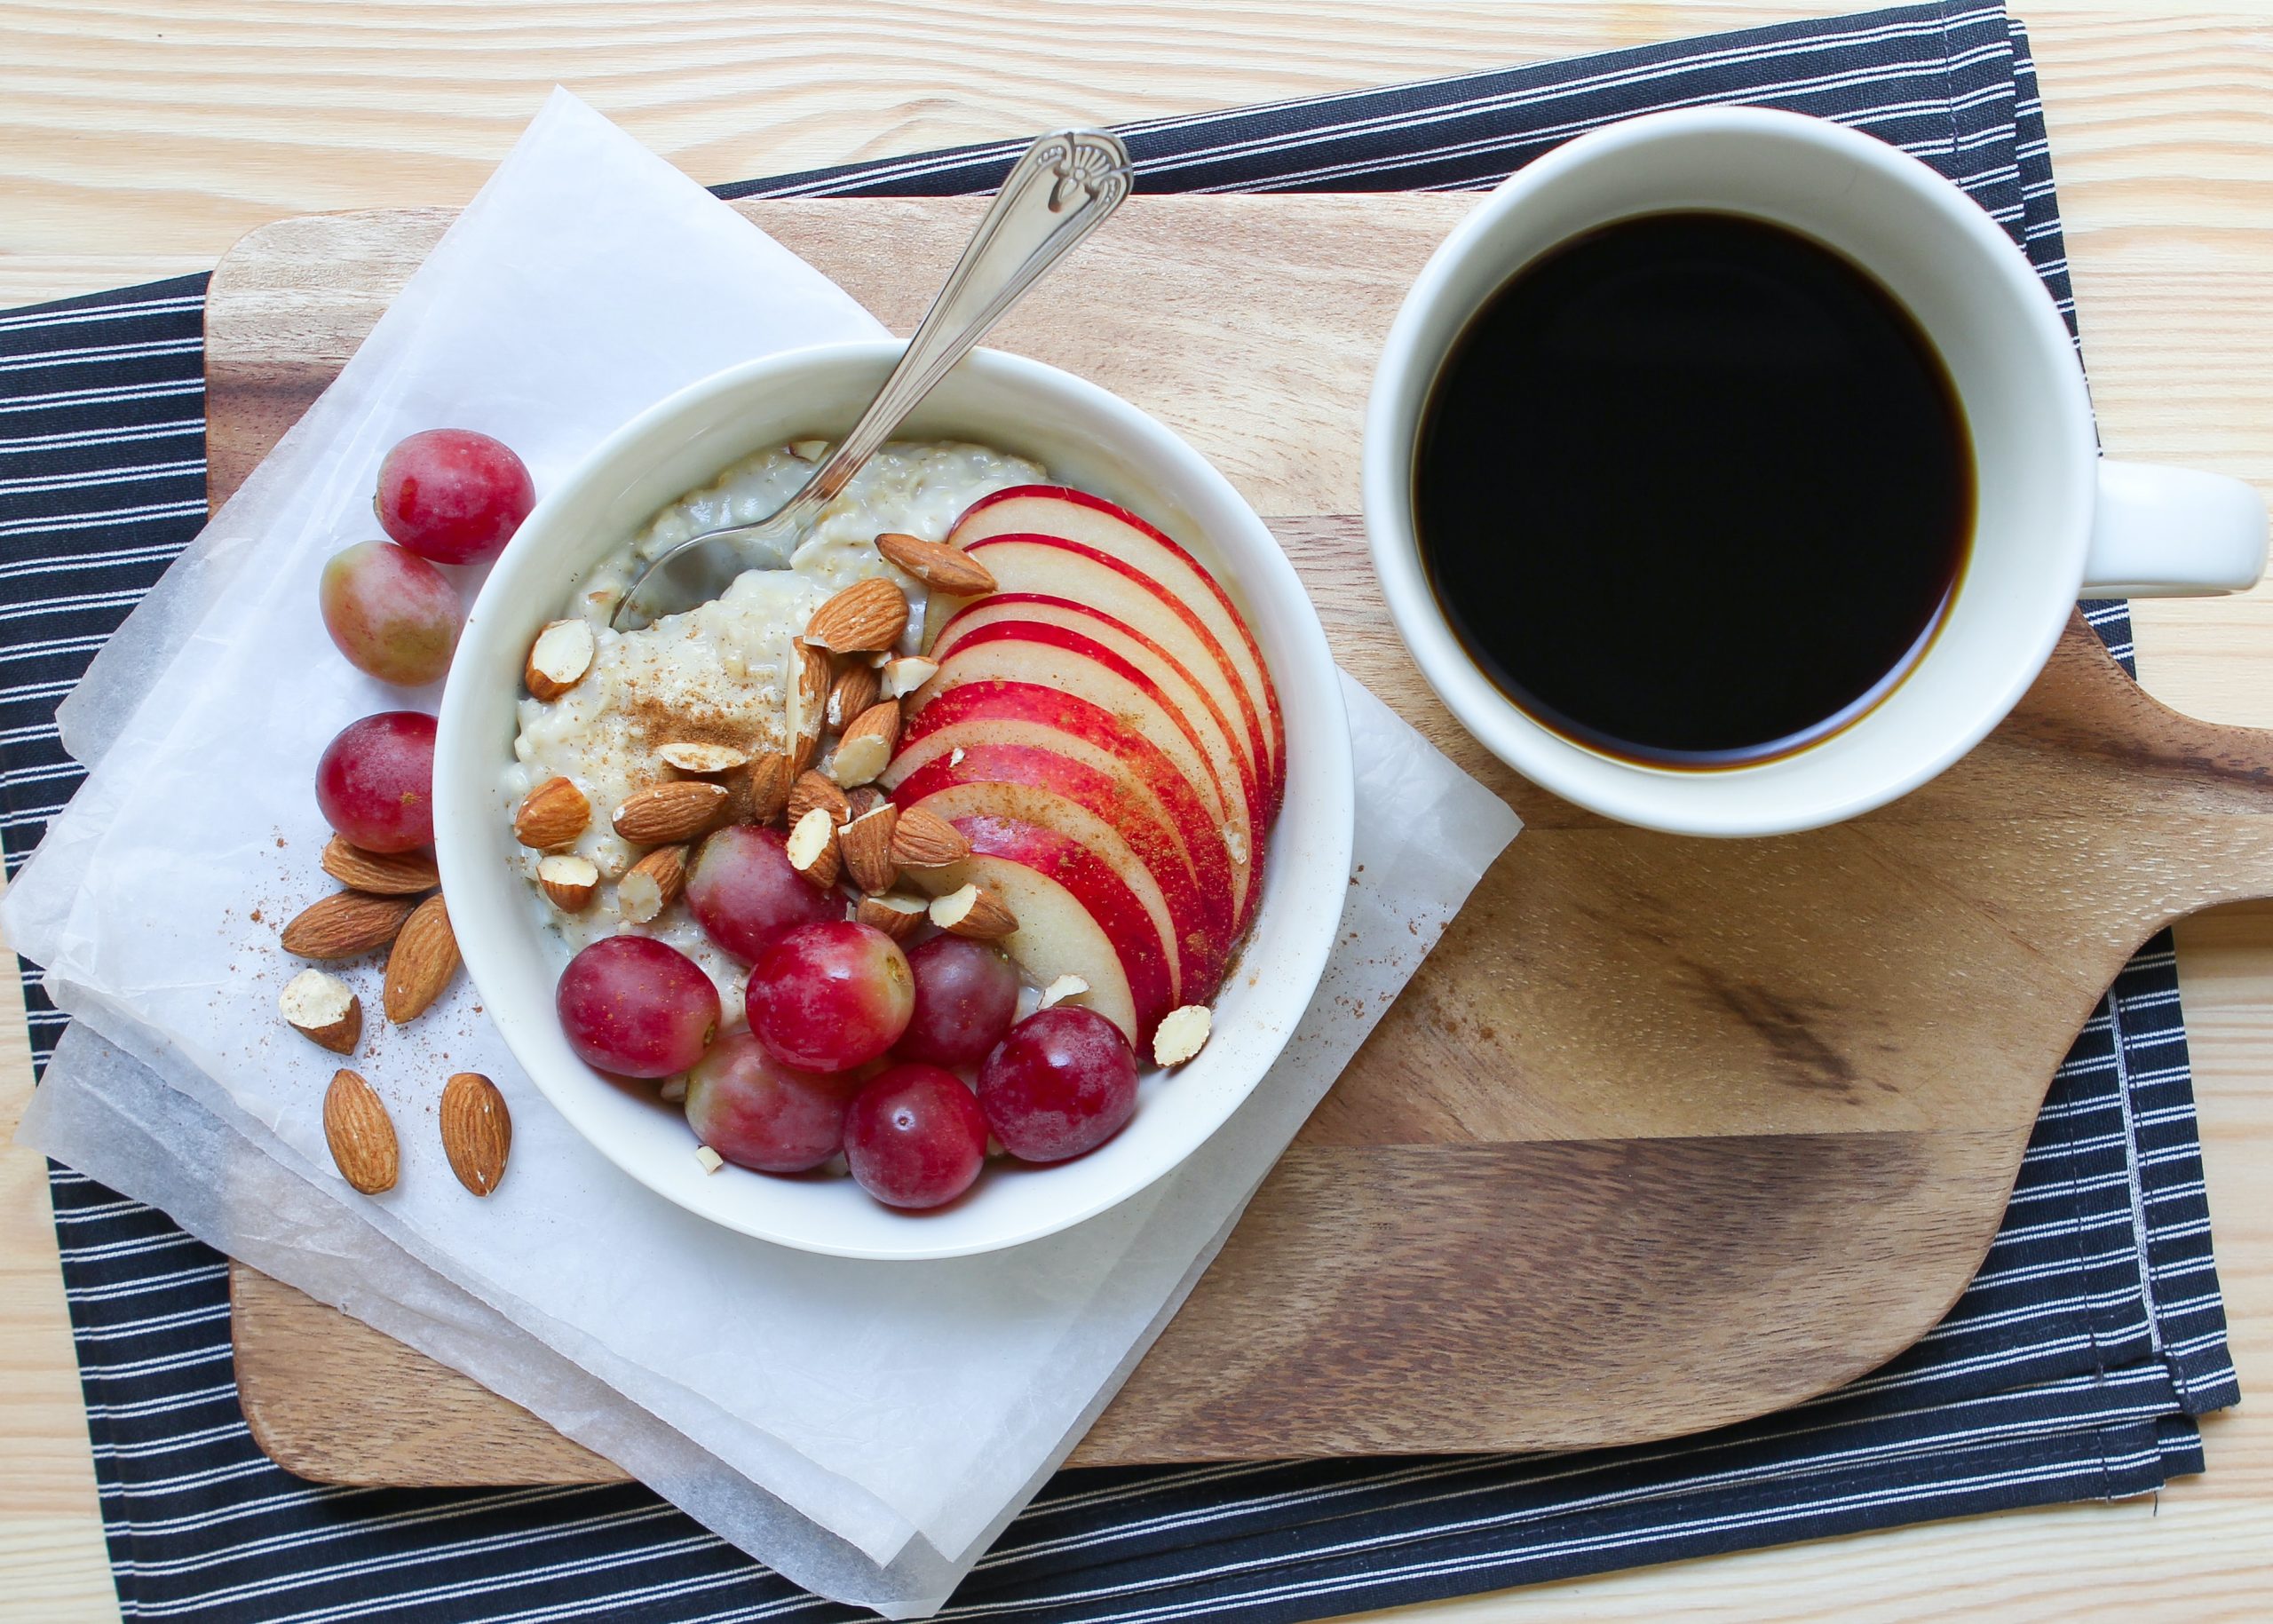 A portion of porridge with apples and a black coffee.